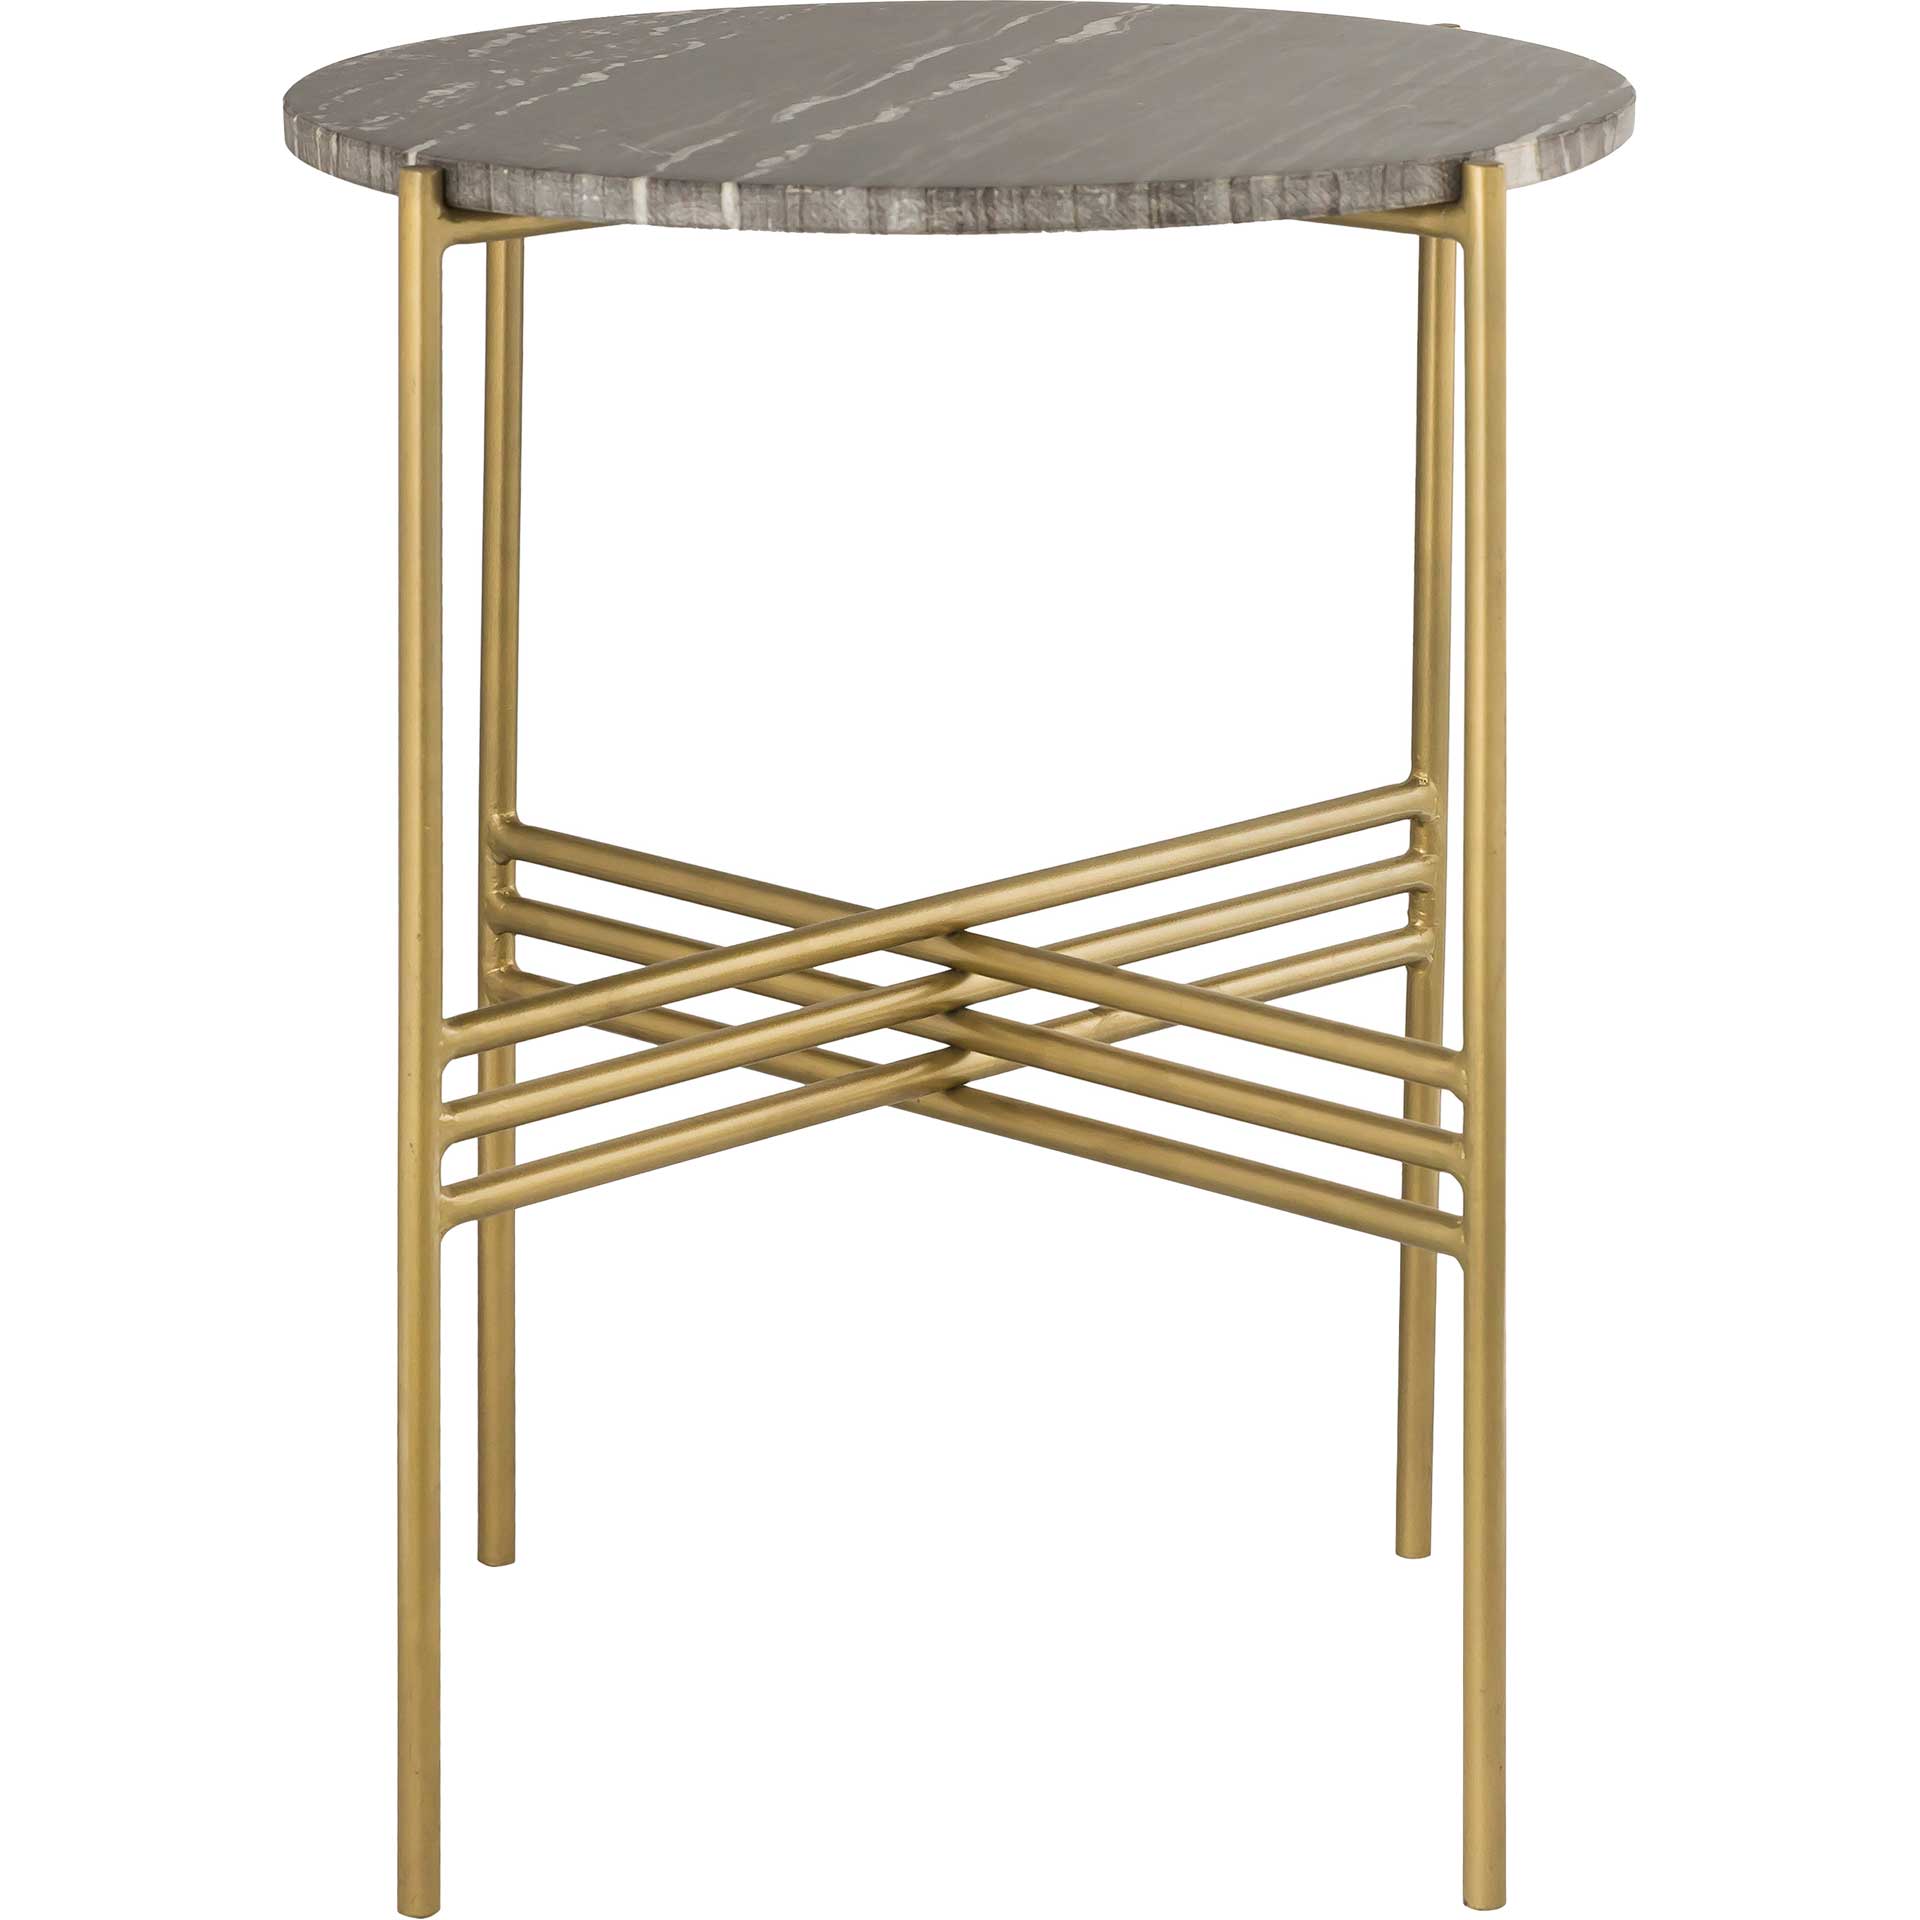 Crispin Side Table Black Marble